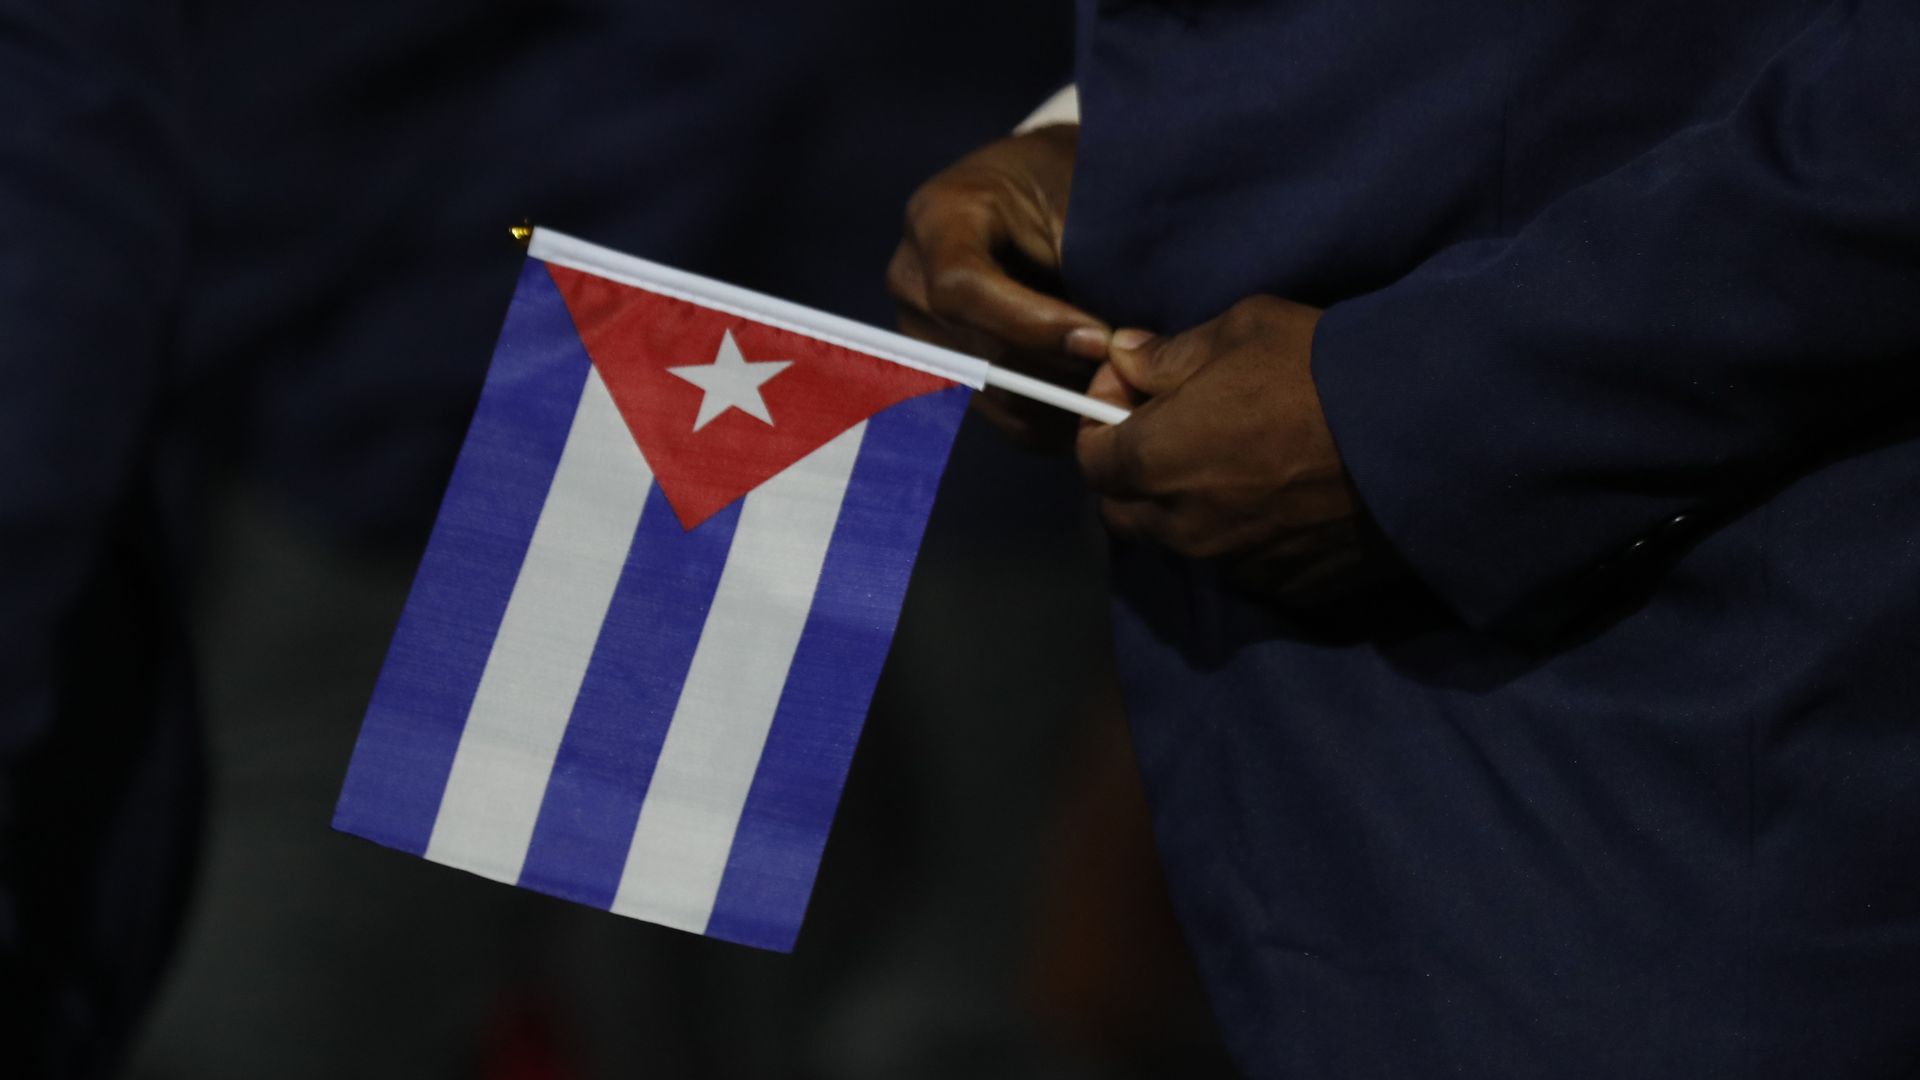 In this image, a man holds a small Cuban flag